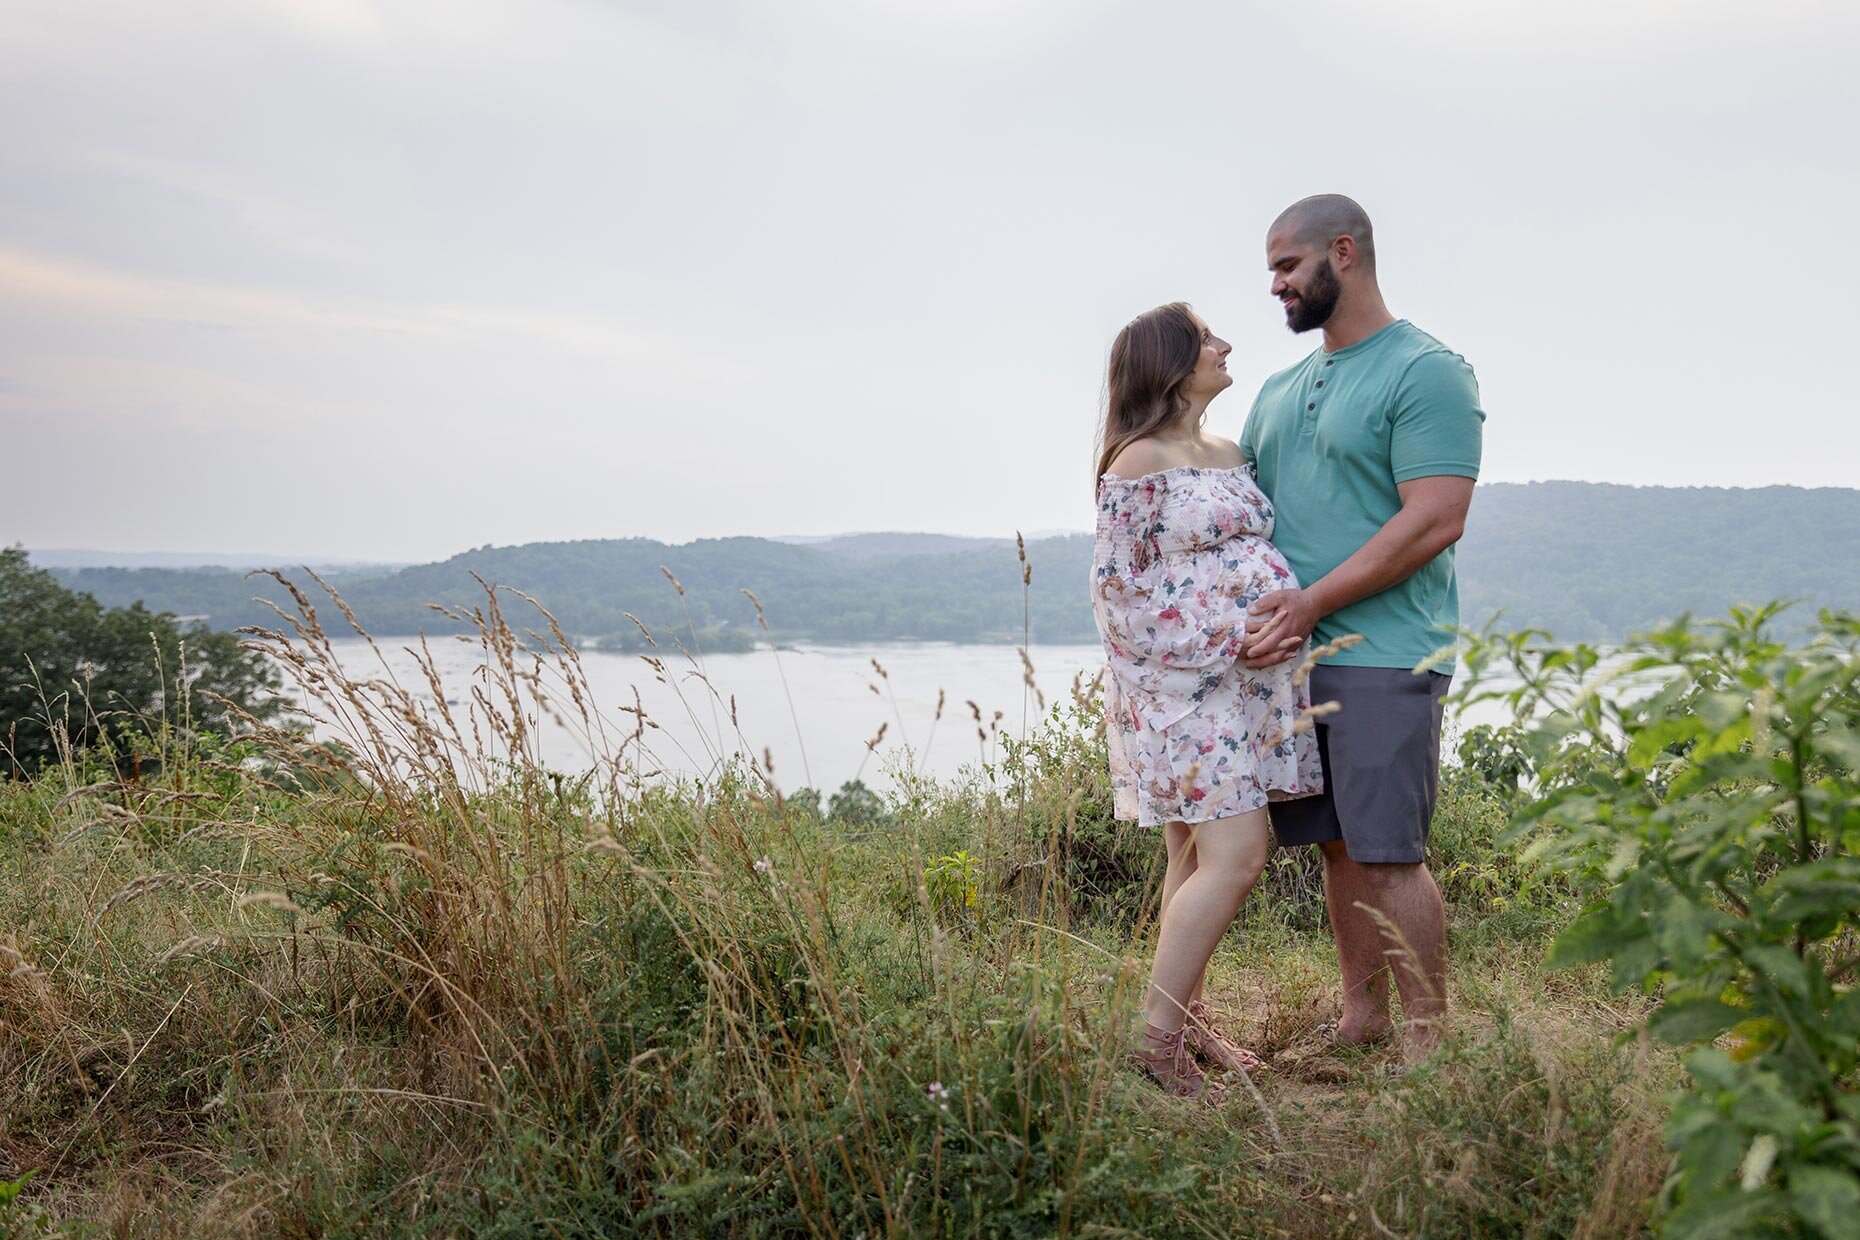 Maternity couple by River in grass overlook